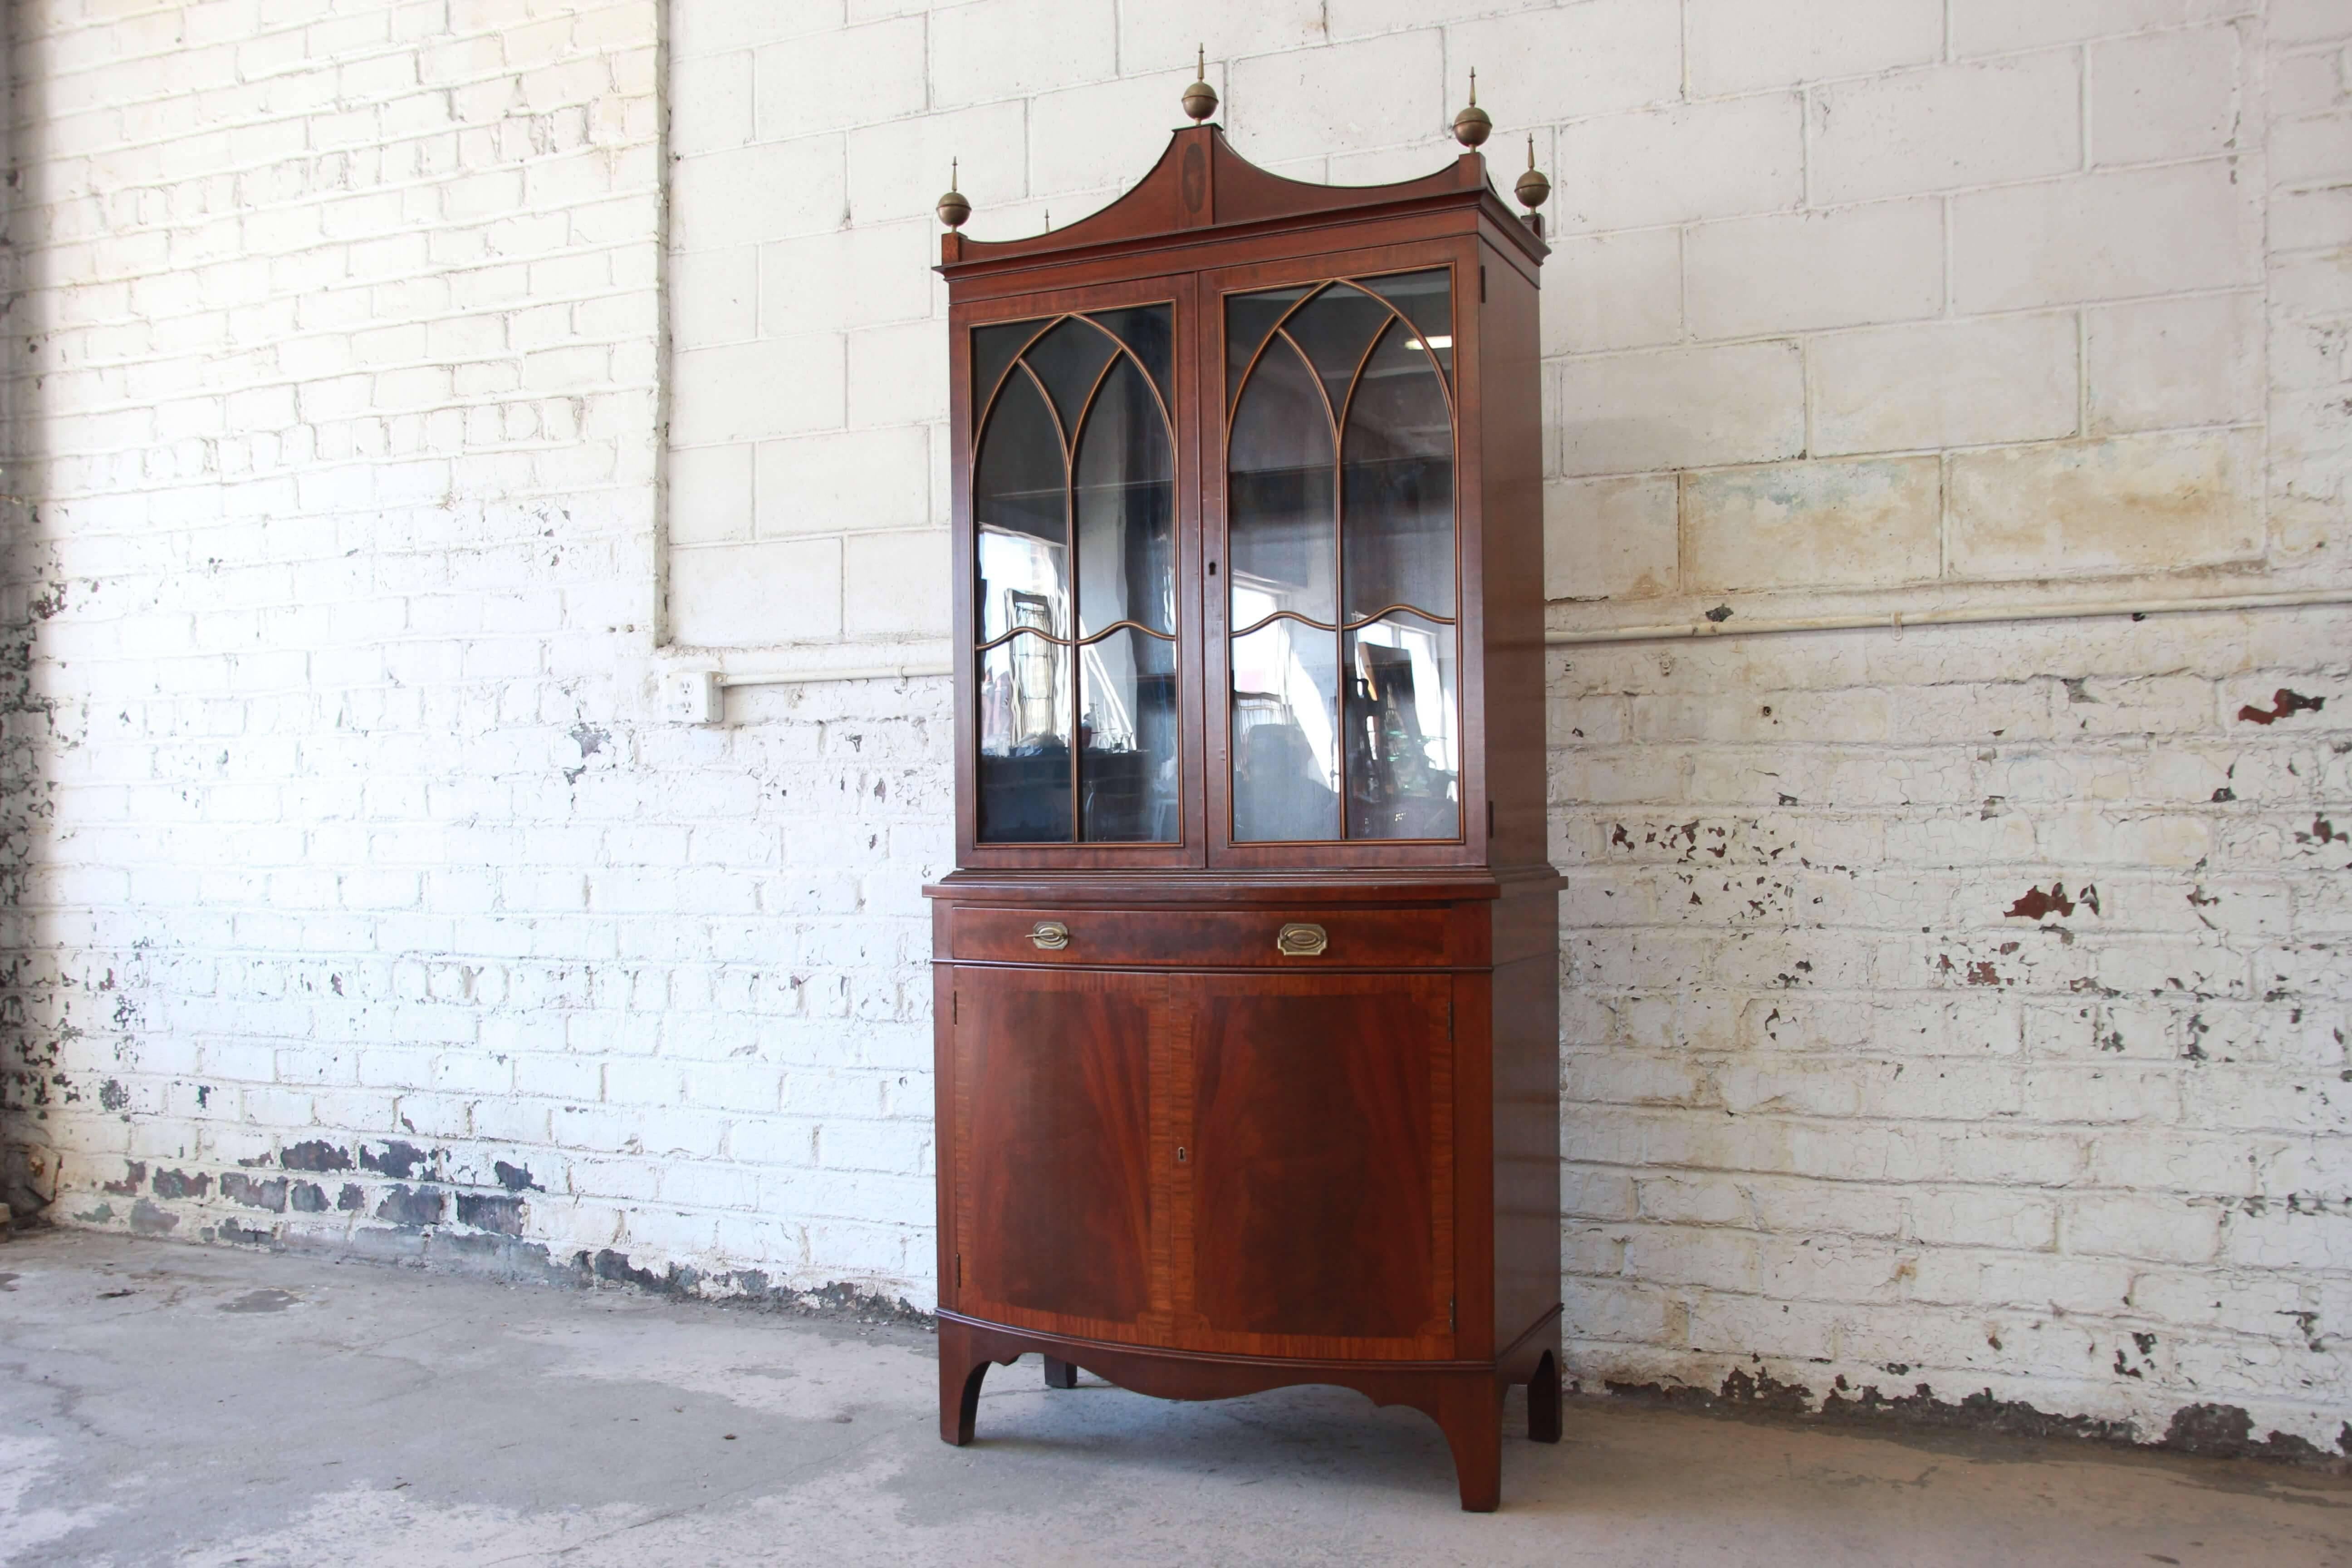 Offering a very nice banded edge English mahogany cabinet. The cabinet has beautiful mahogany graining with banded edge doors and drawers. Two glass doors have nice detailed cathedral design and open up to two adjustable wooden shelved great for